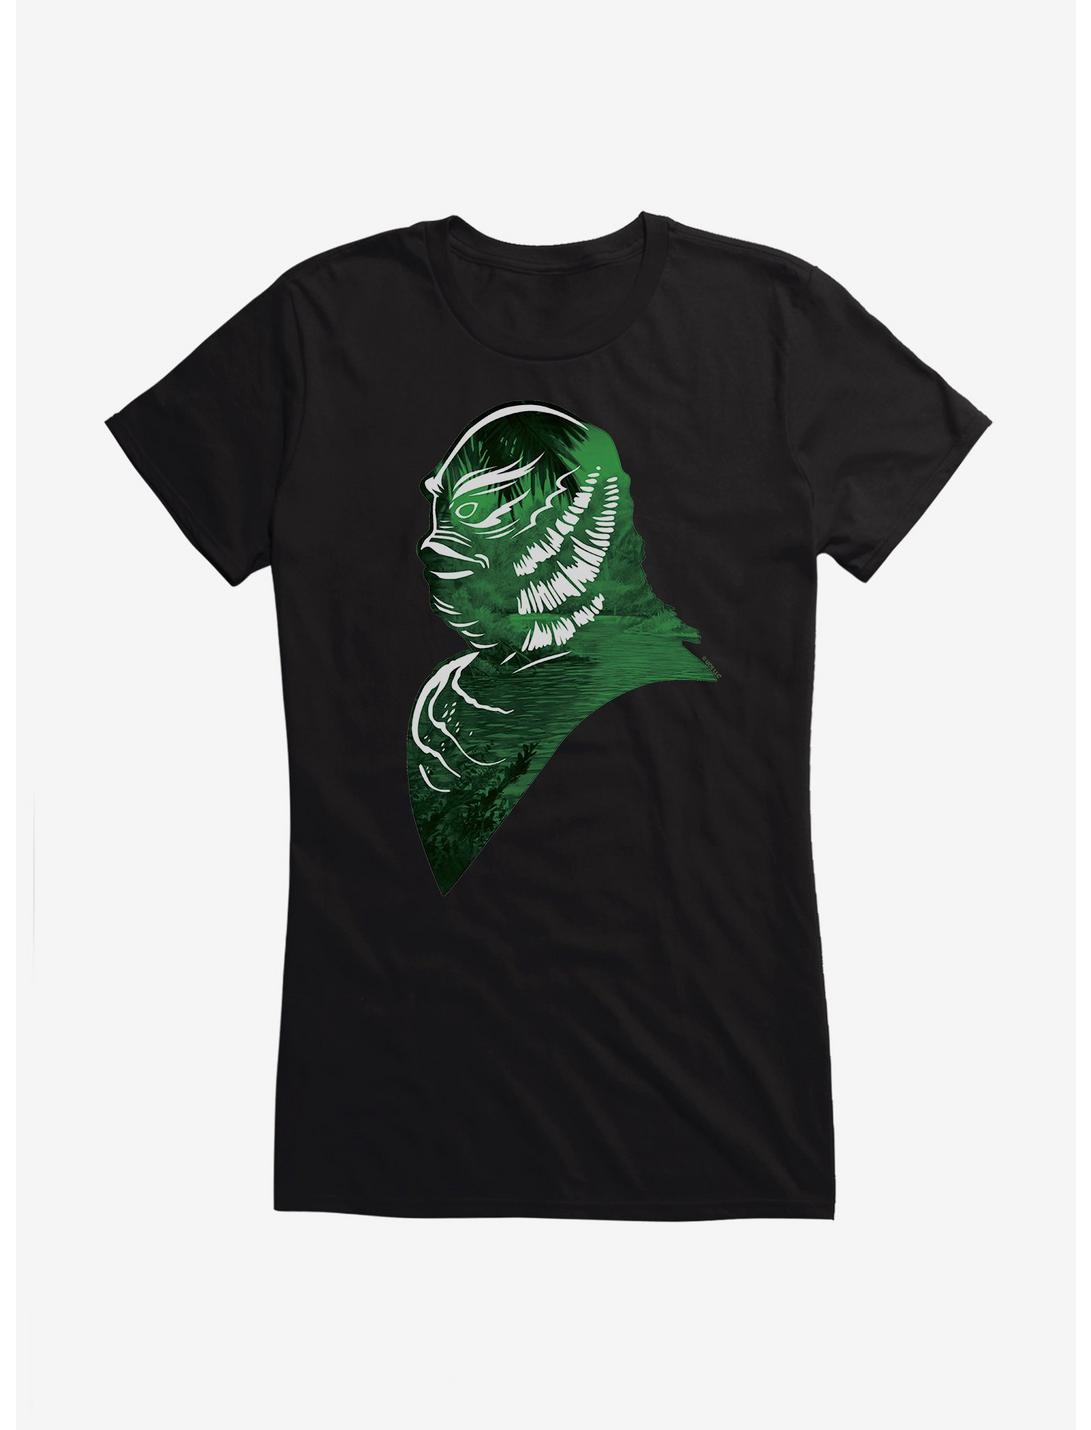 Universal Monsters Creature From The Black Lagoon Amazon Profile Girls T-Shirt, BLACK, hi-res